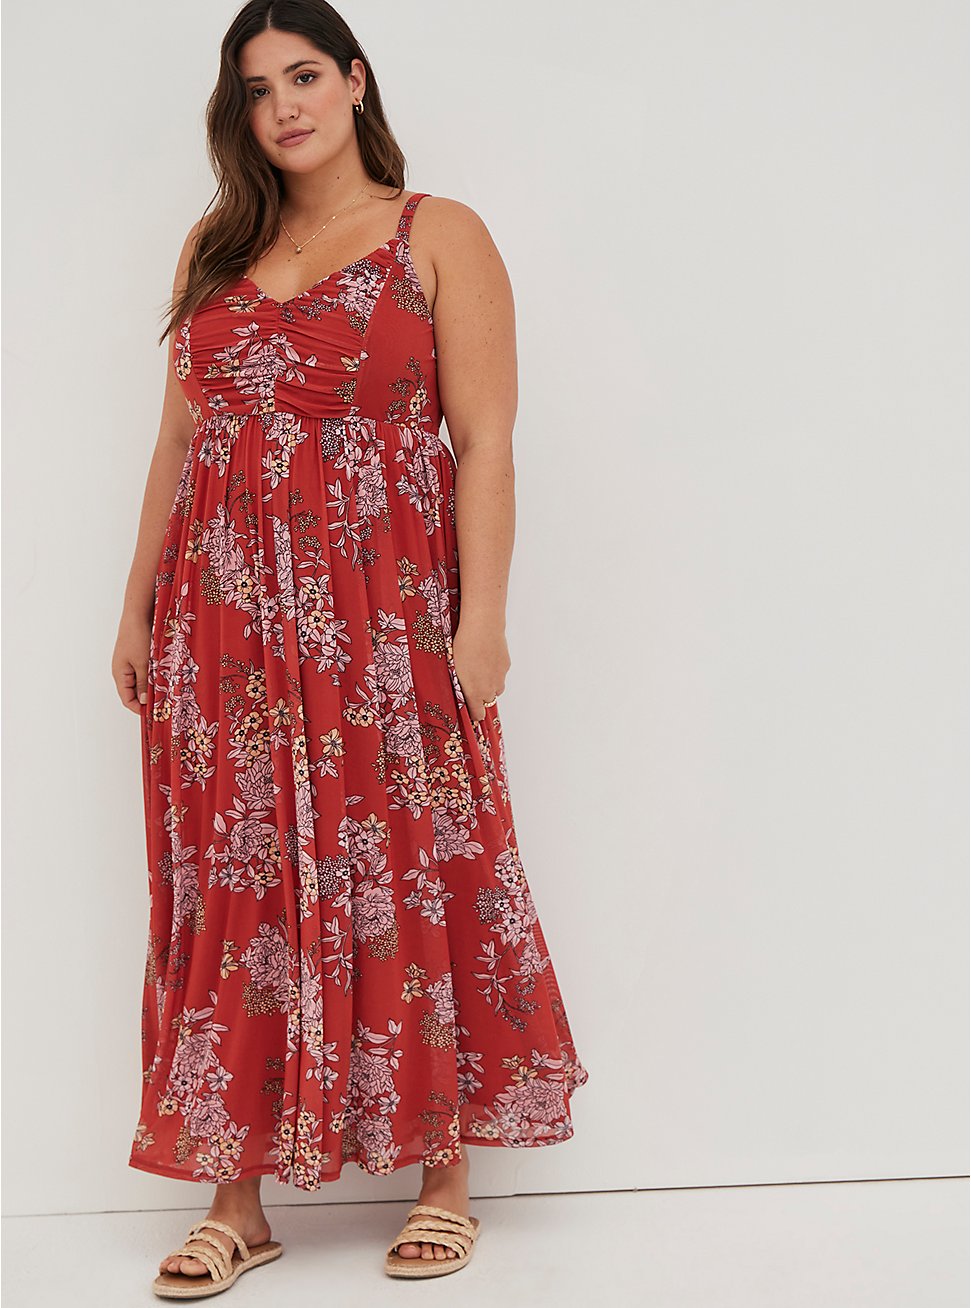 Plus Size Pleated Maxi Dress - Soft Mesh Floral Red, FLORAL - RED, hi-res